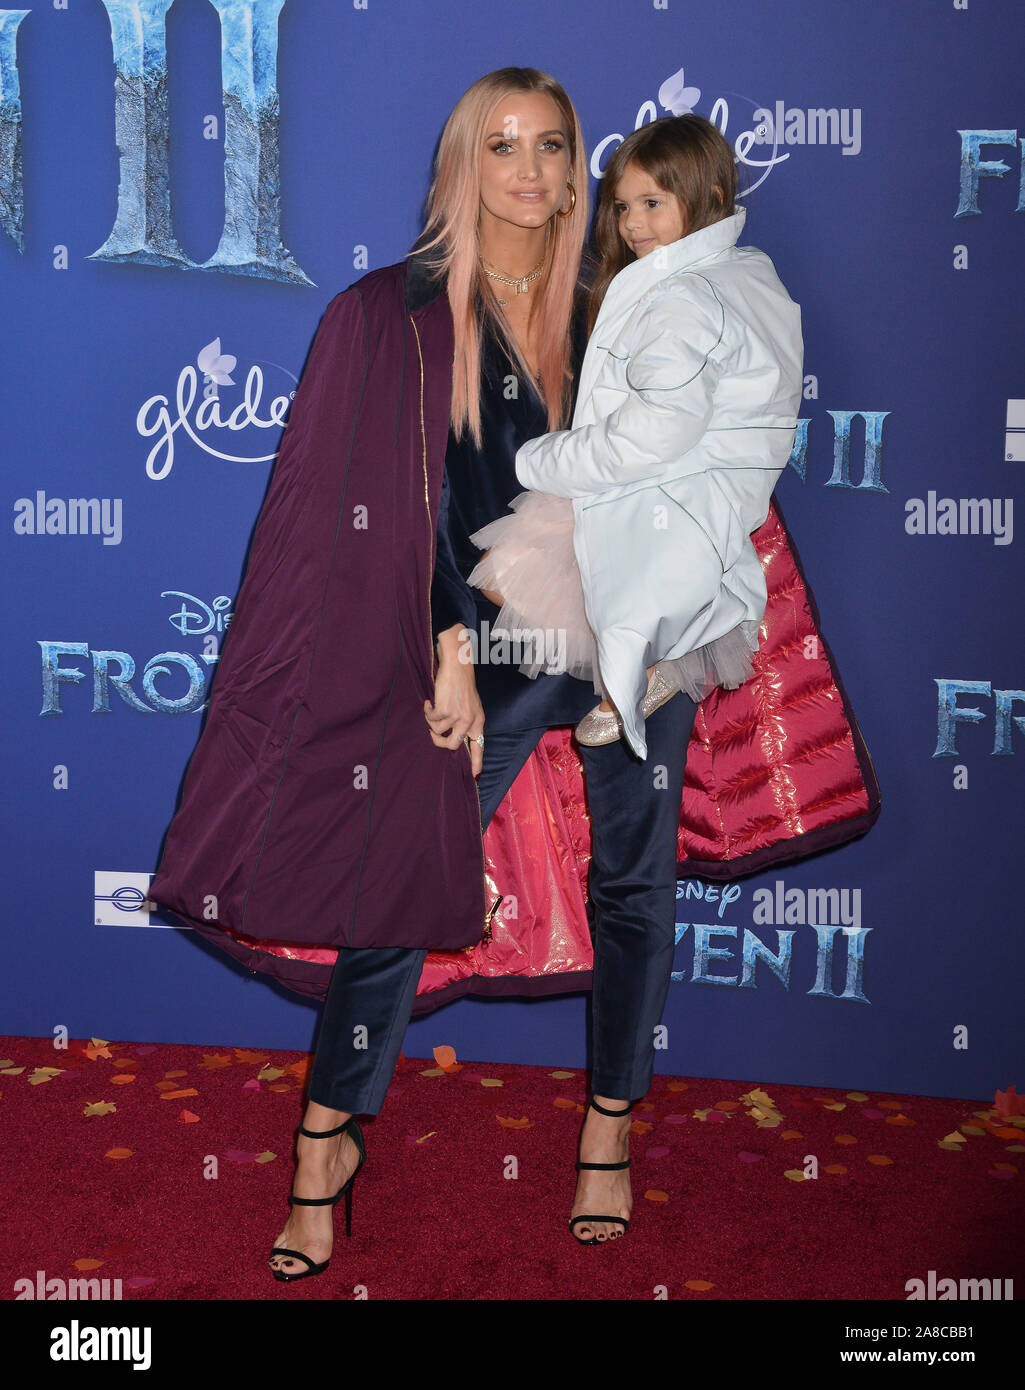 Los Angeles, USA. 07th Nov, 2019. Ashlee Simpson, Jagger Snow Ross 079 attends the Premiere of Disney's 'Frozen 2' at Dolby Theatre on November 07, 2019 in Hollywood, California. Credit: Tsuni/USA/Alamy Live News Stock Photo